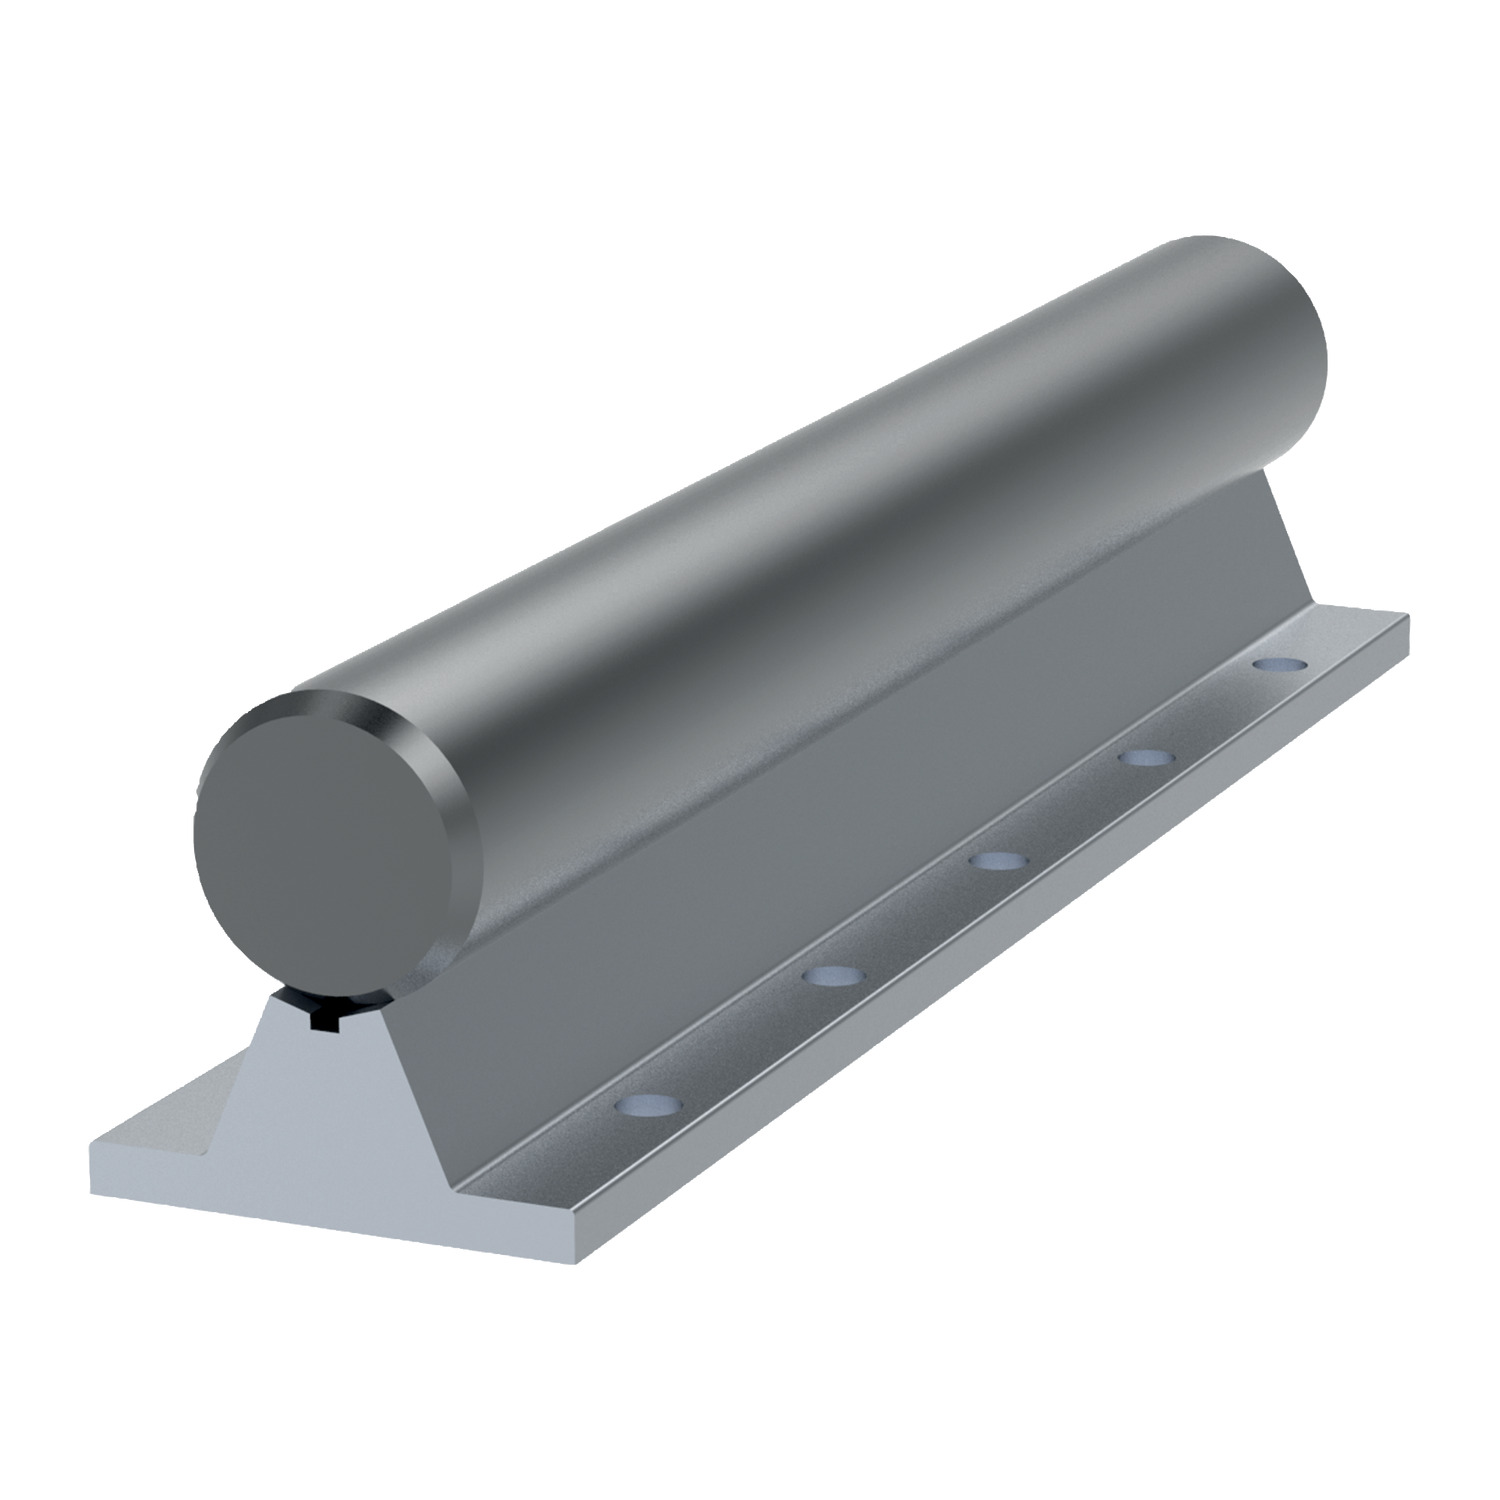 25Ø Shaft Support Rails Shaft support rail for 25mm shaft. Complete with shaft, up to 3 metres long